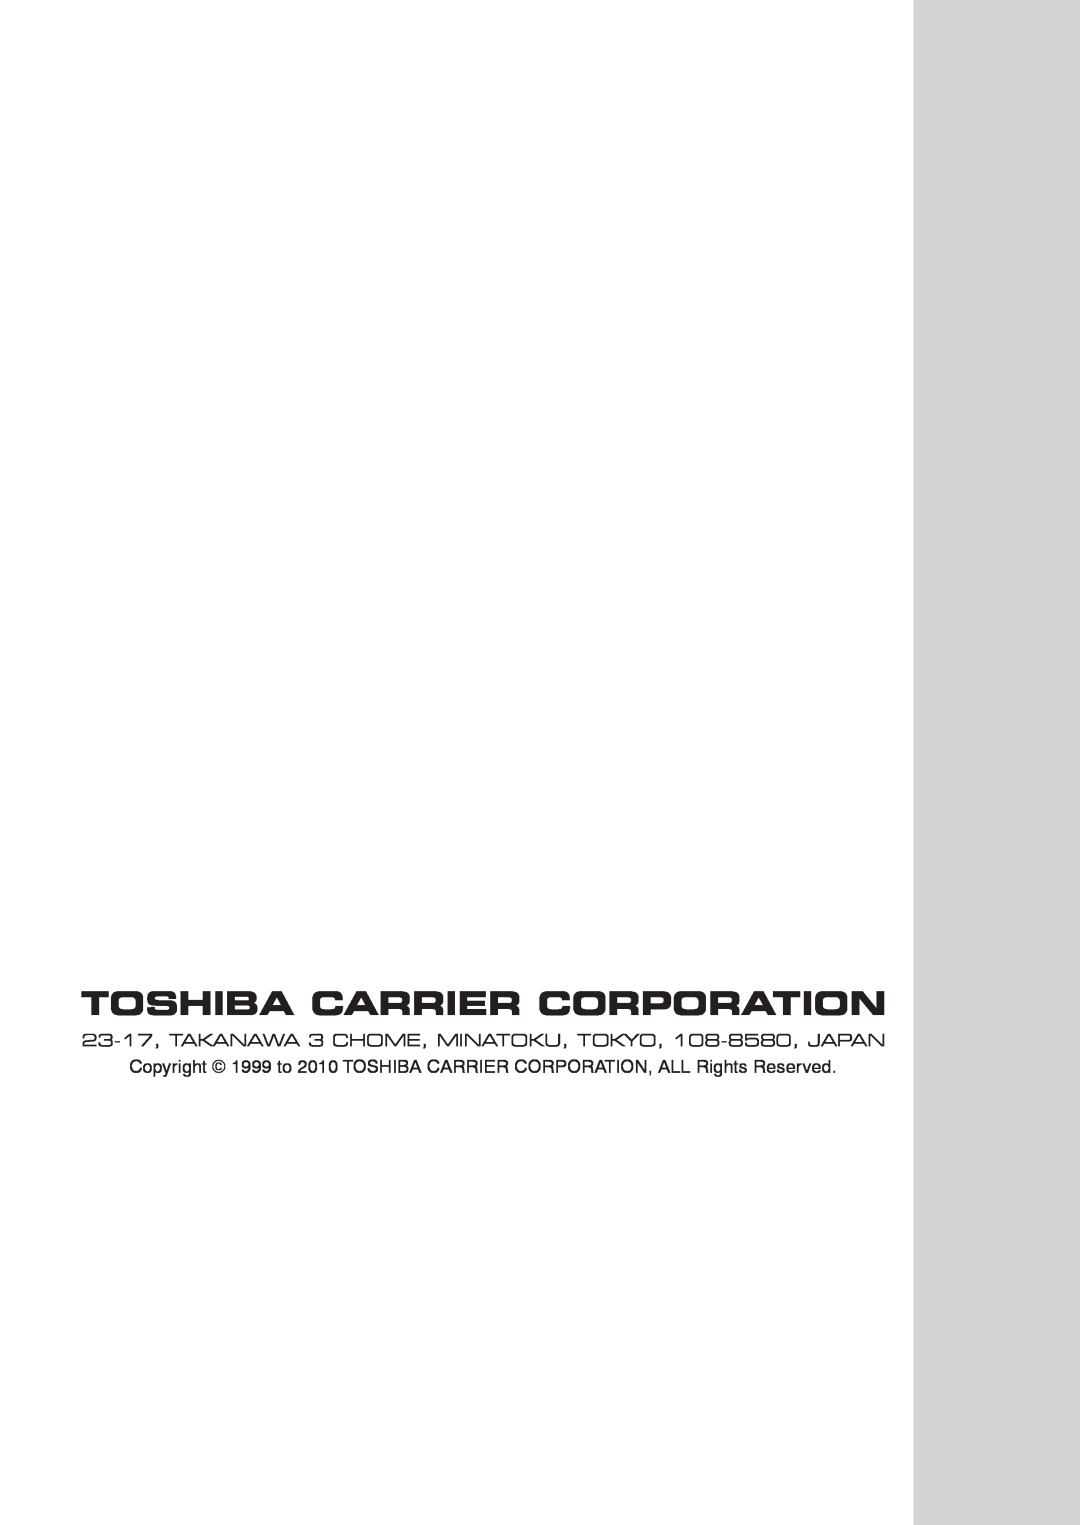 Toshiba CEILING TYPE, CONCEALED DUCK TYPE service manual Toshiba Carrier Corporation 